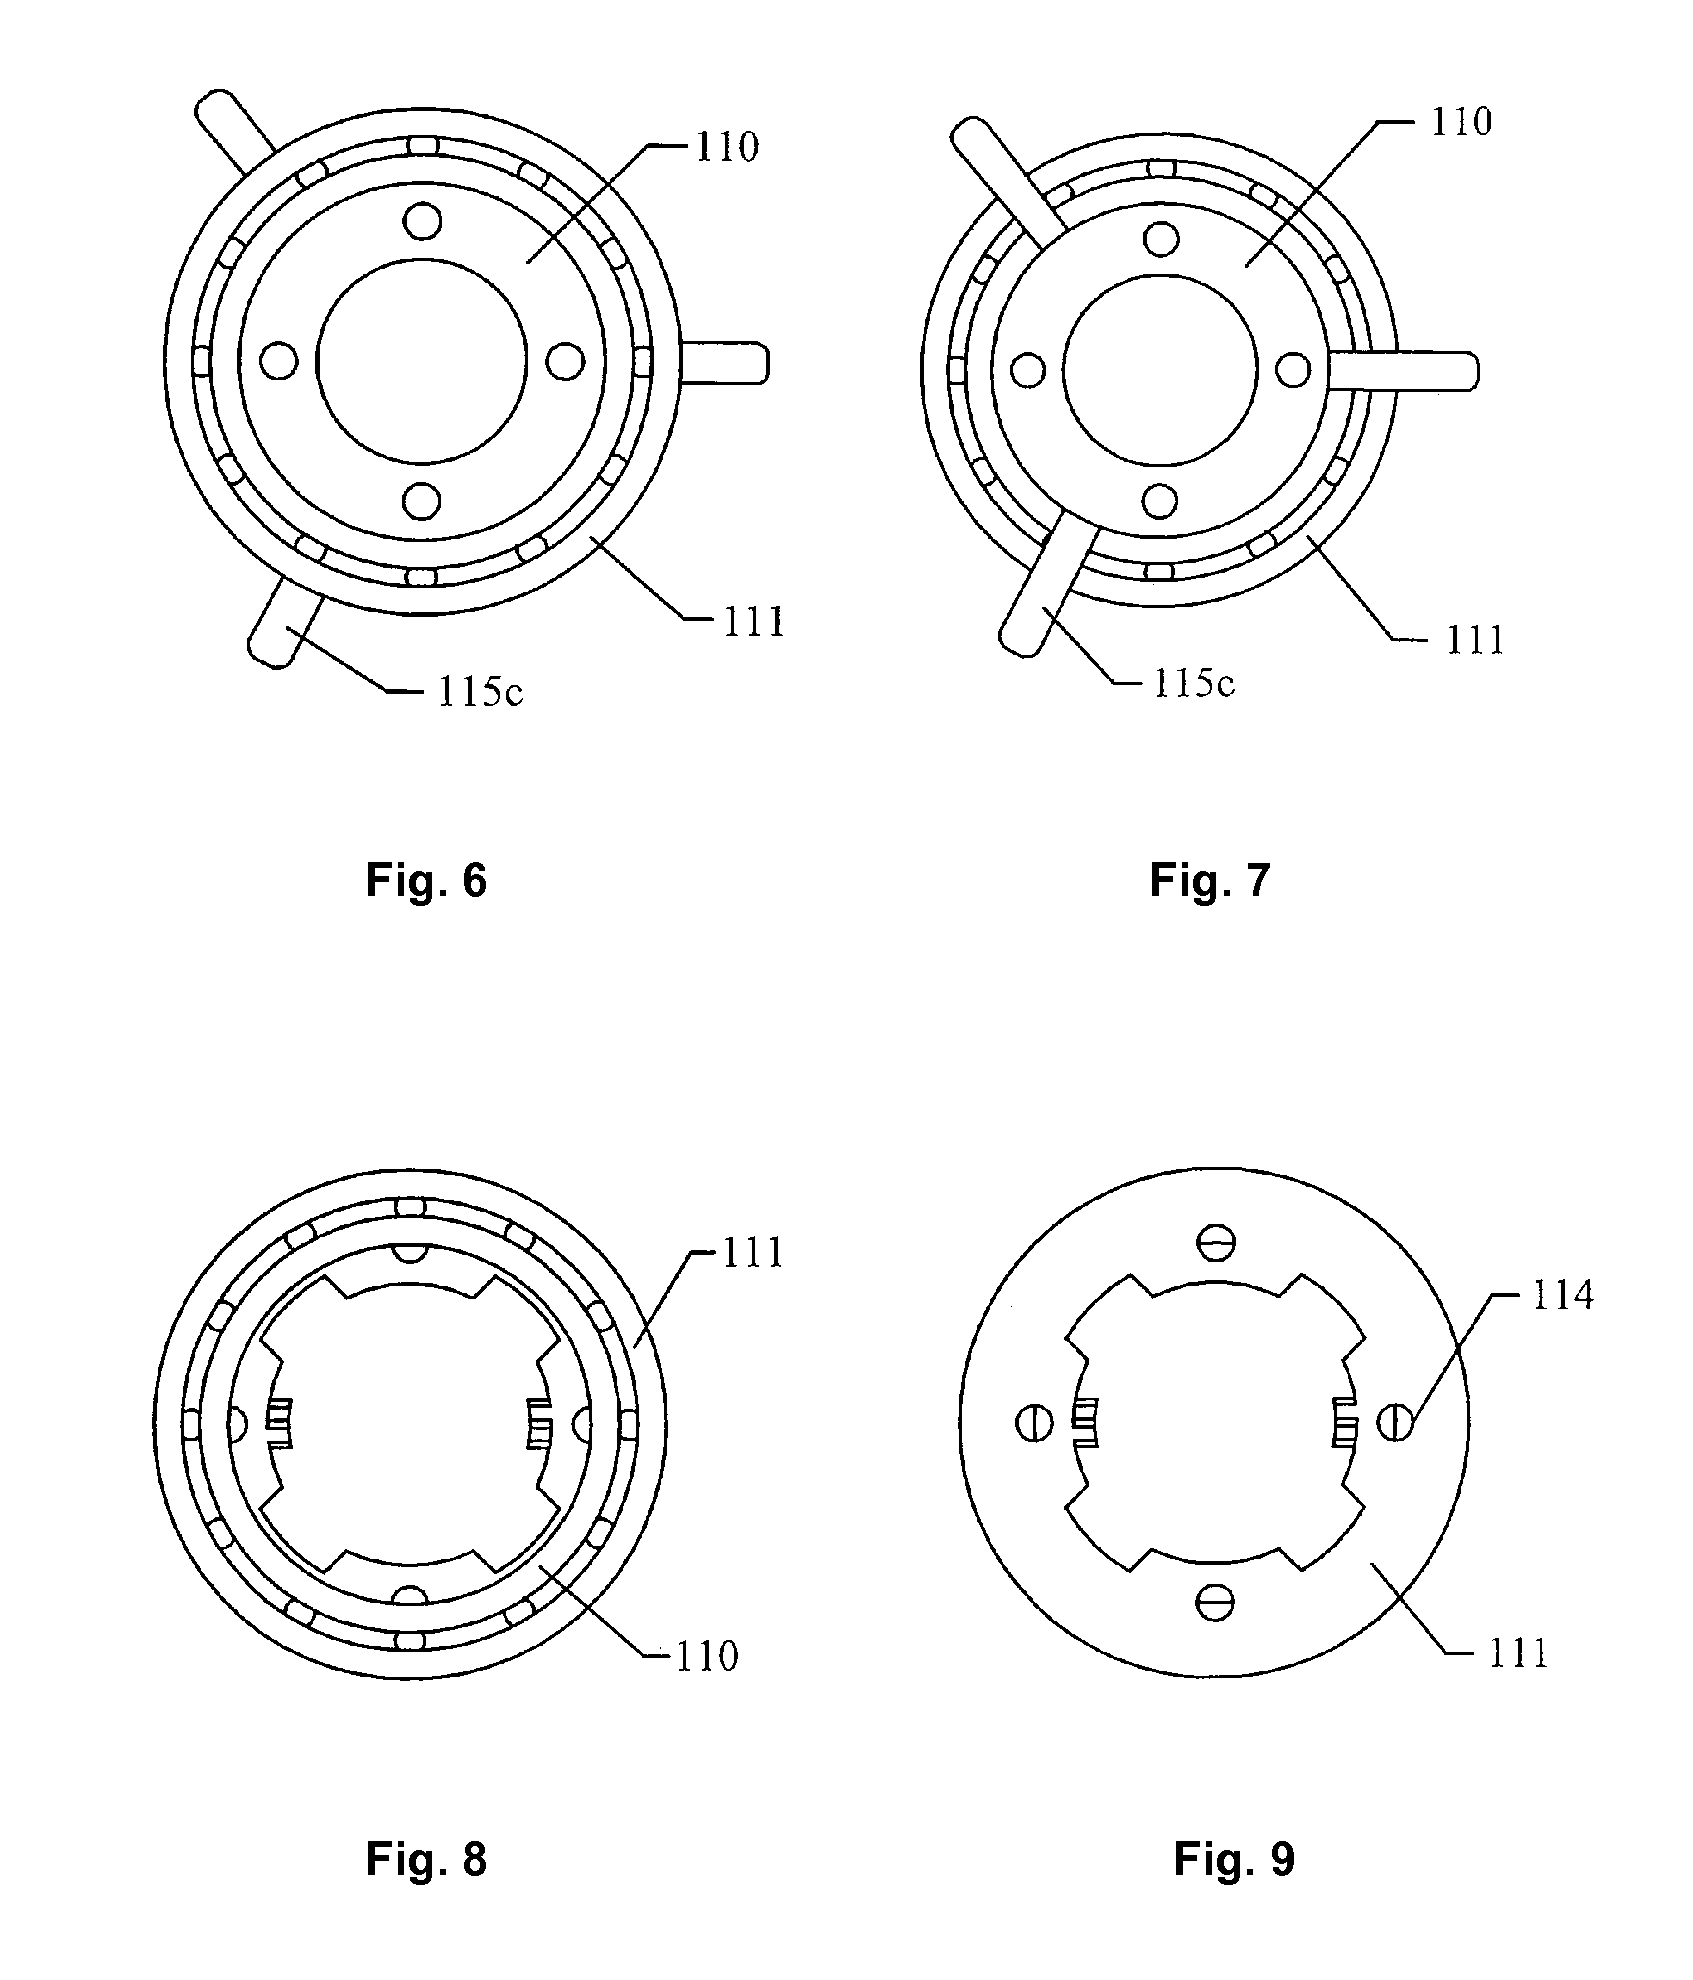 Surgical Stapling Head Assembly with a Rotary Cutter